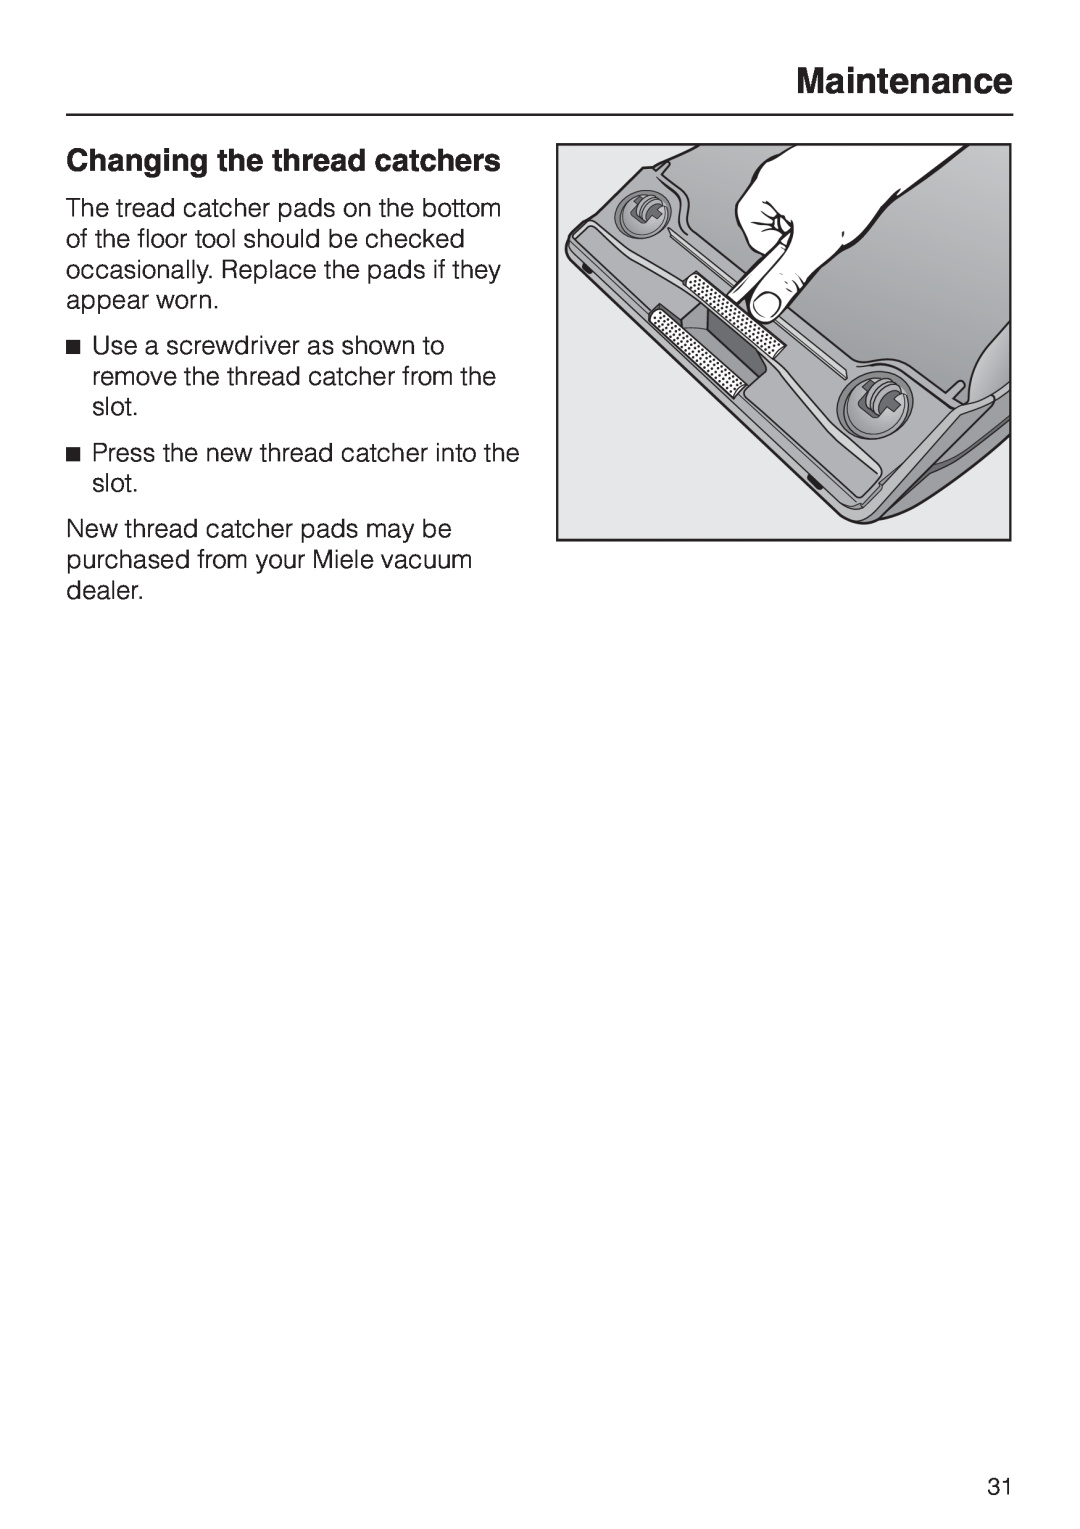 Miele HS09 operating instructions Changing the thread catchers, Maintenance 